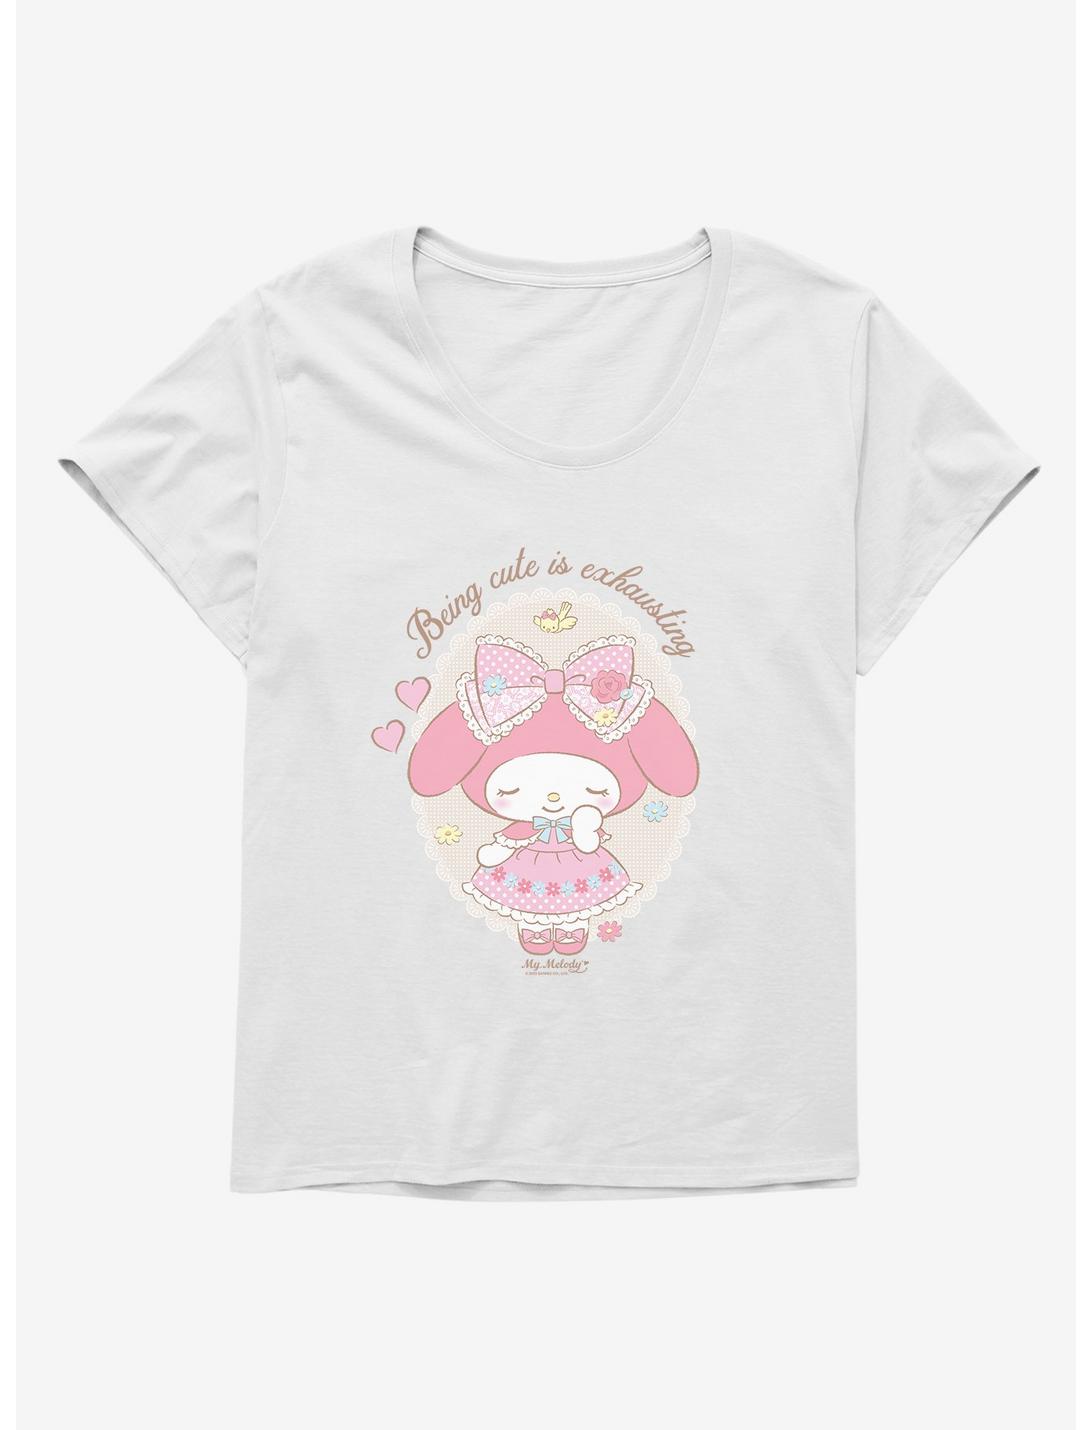 My Melody Being Cute Is Exhausting Womens T-Shirt Plus Size, WHITE, hi-res